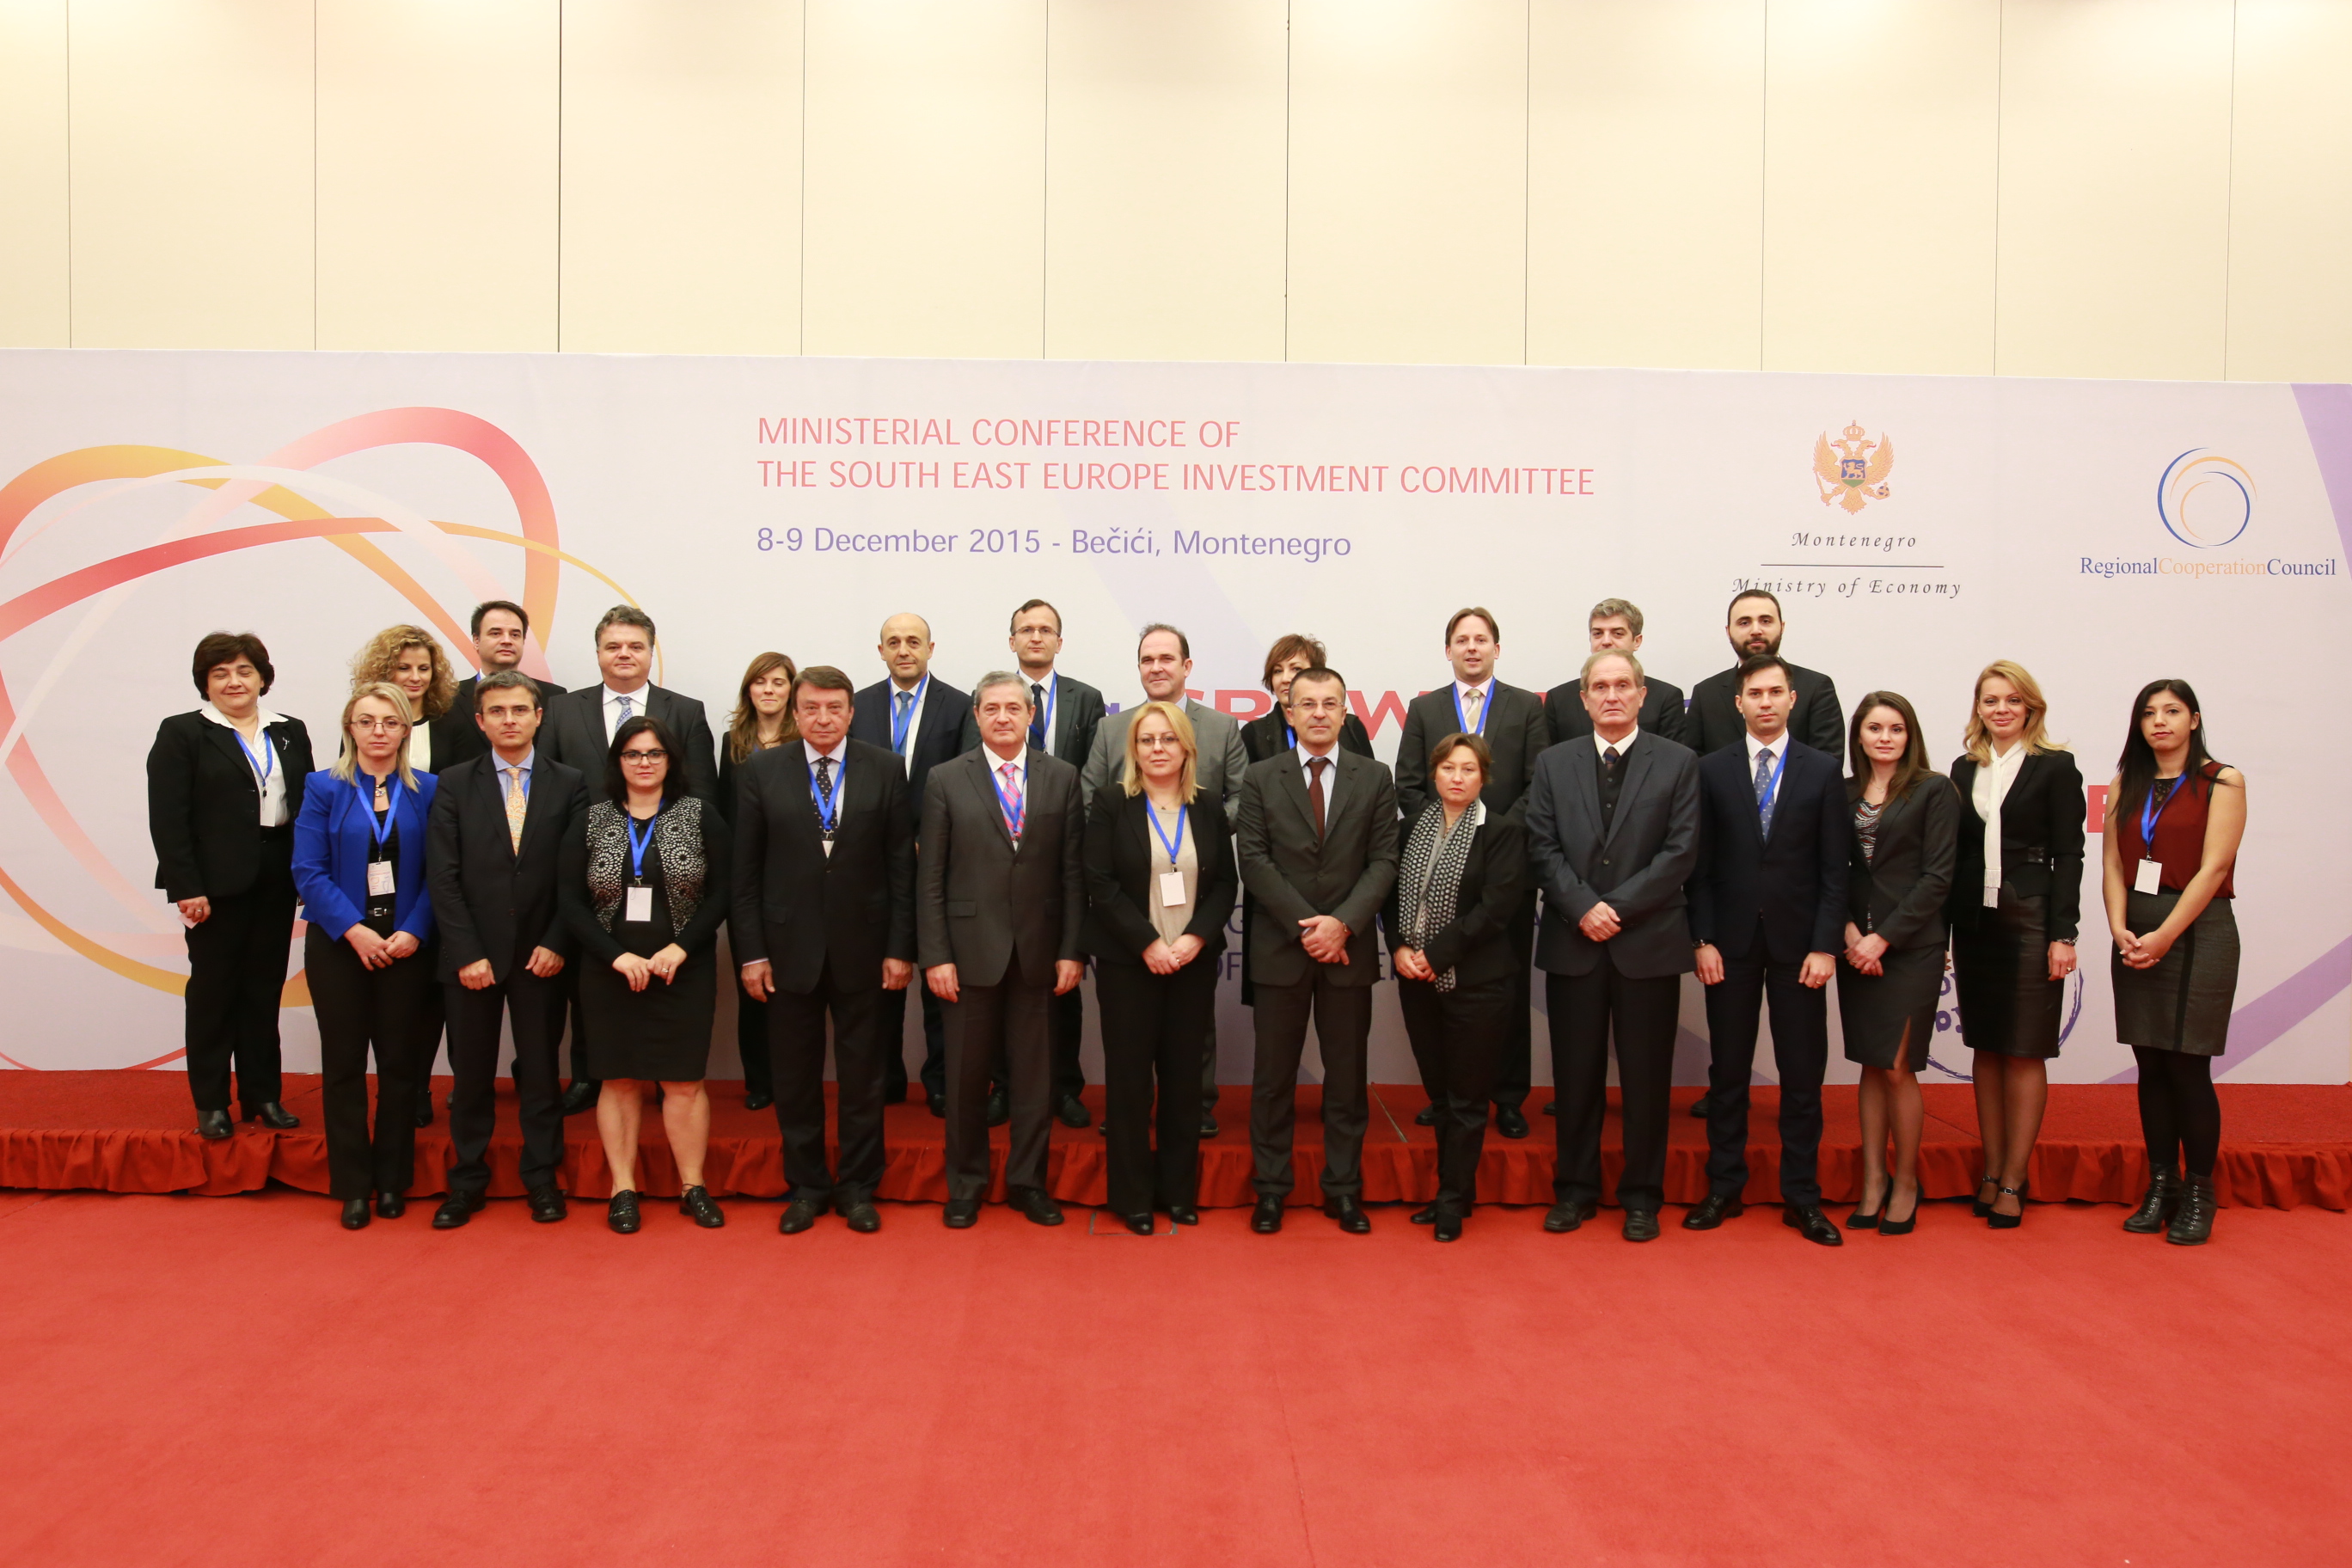 Participants of the SEEIC Ministerial Conference, held on 9 December 2015 in Budva, Montenegro. (Photo: RCC)